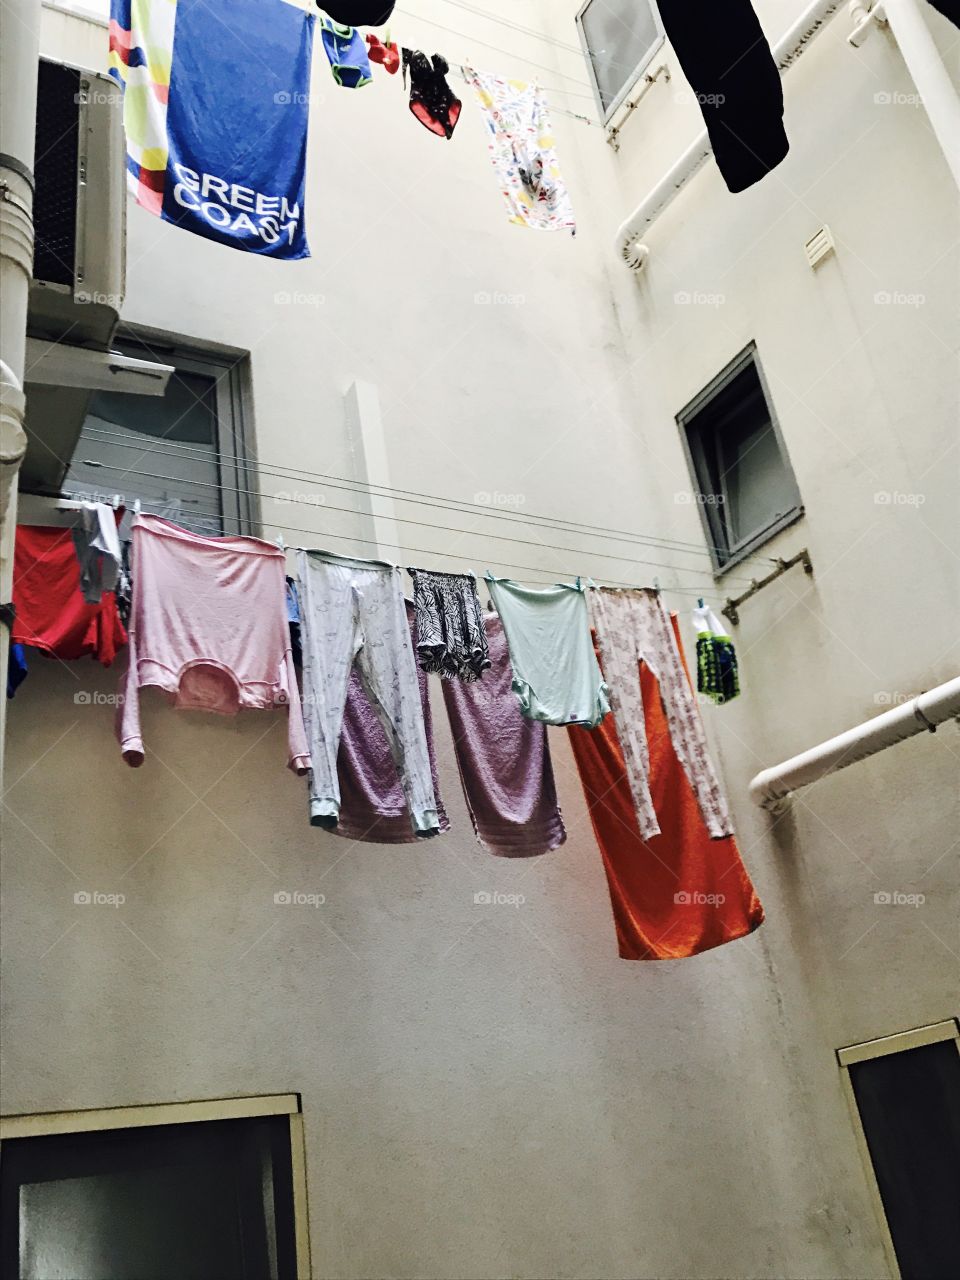 Clothes-hanging-